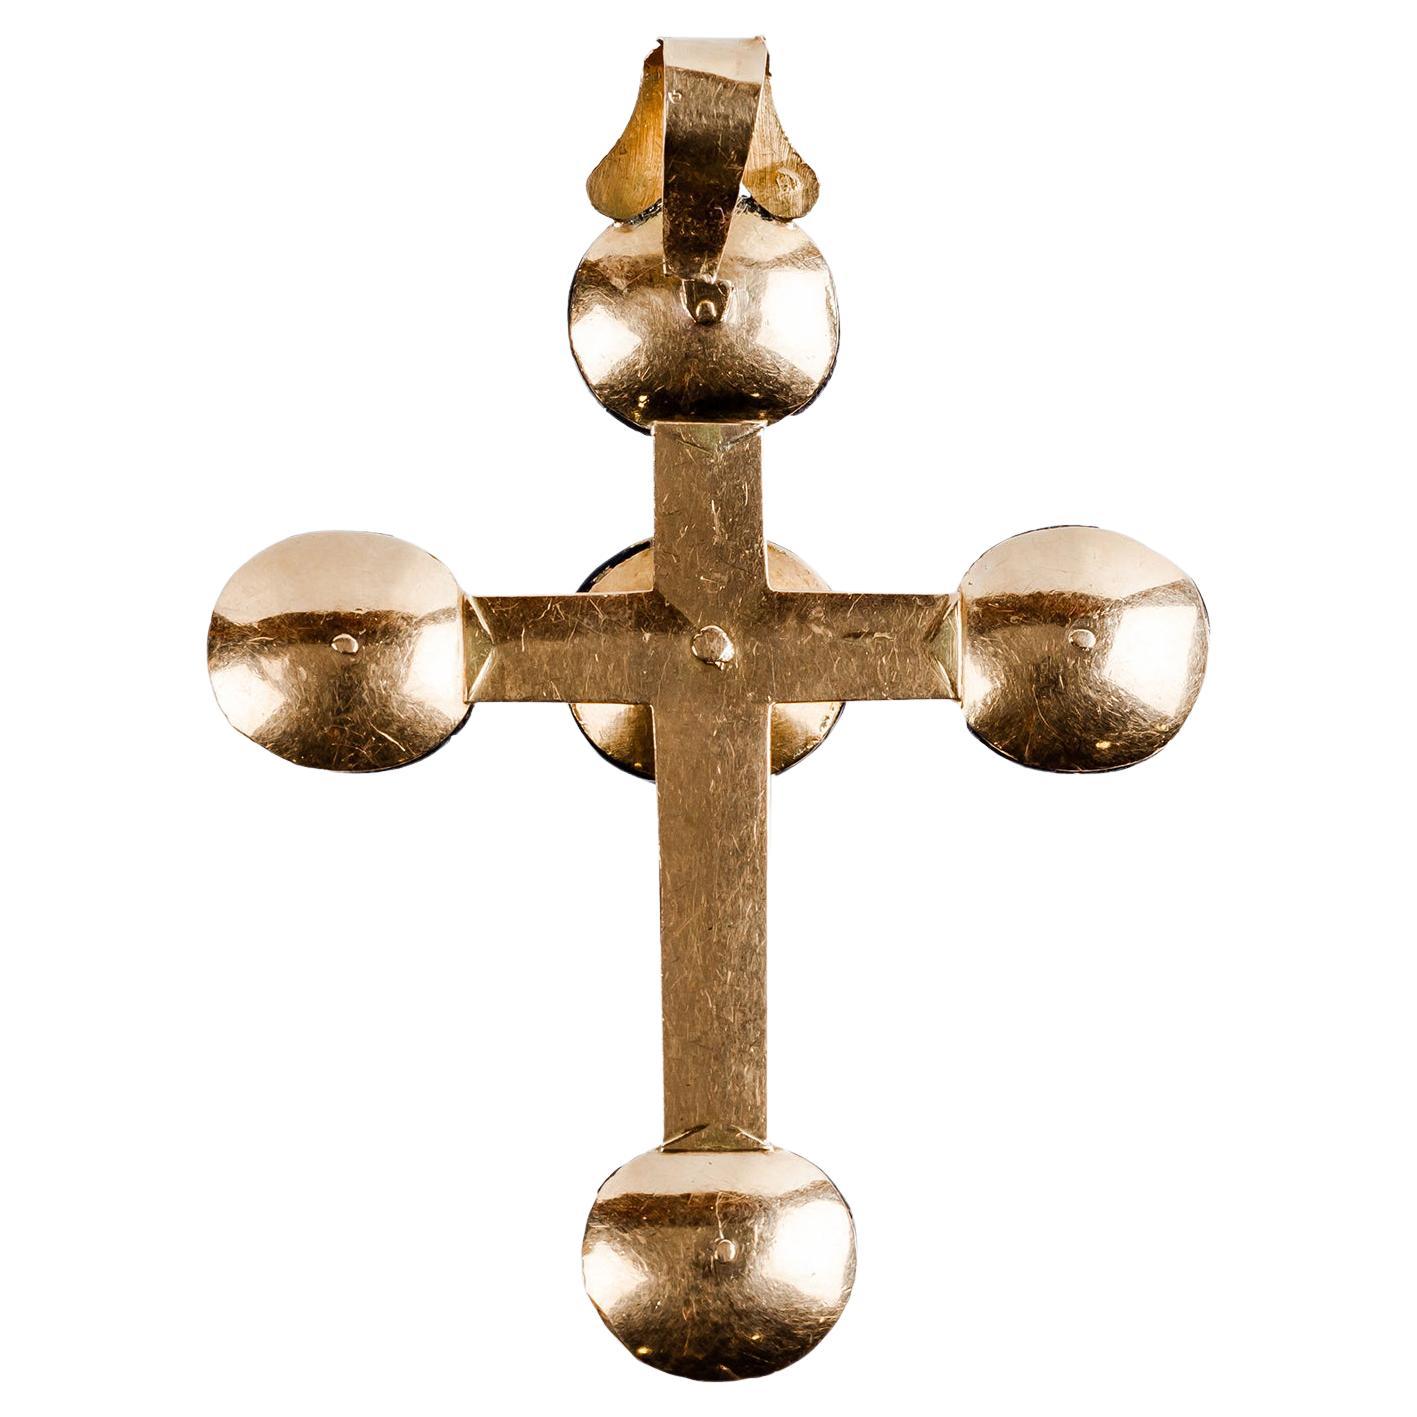 XVII-XVIII Capucine Cross in Yellow Gold, rose Diamonds & Onyx Black enamel Conical Chatons.
Measures: 70x53mm / 2.75x2.08in
Regional French Cross 

The Capucine cross is usually quite large, at least 70mm in height, and set with very small rose-cut